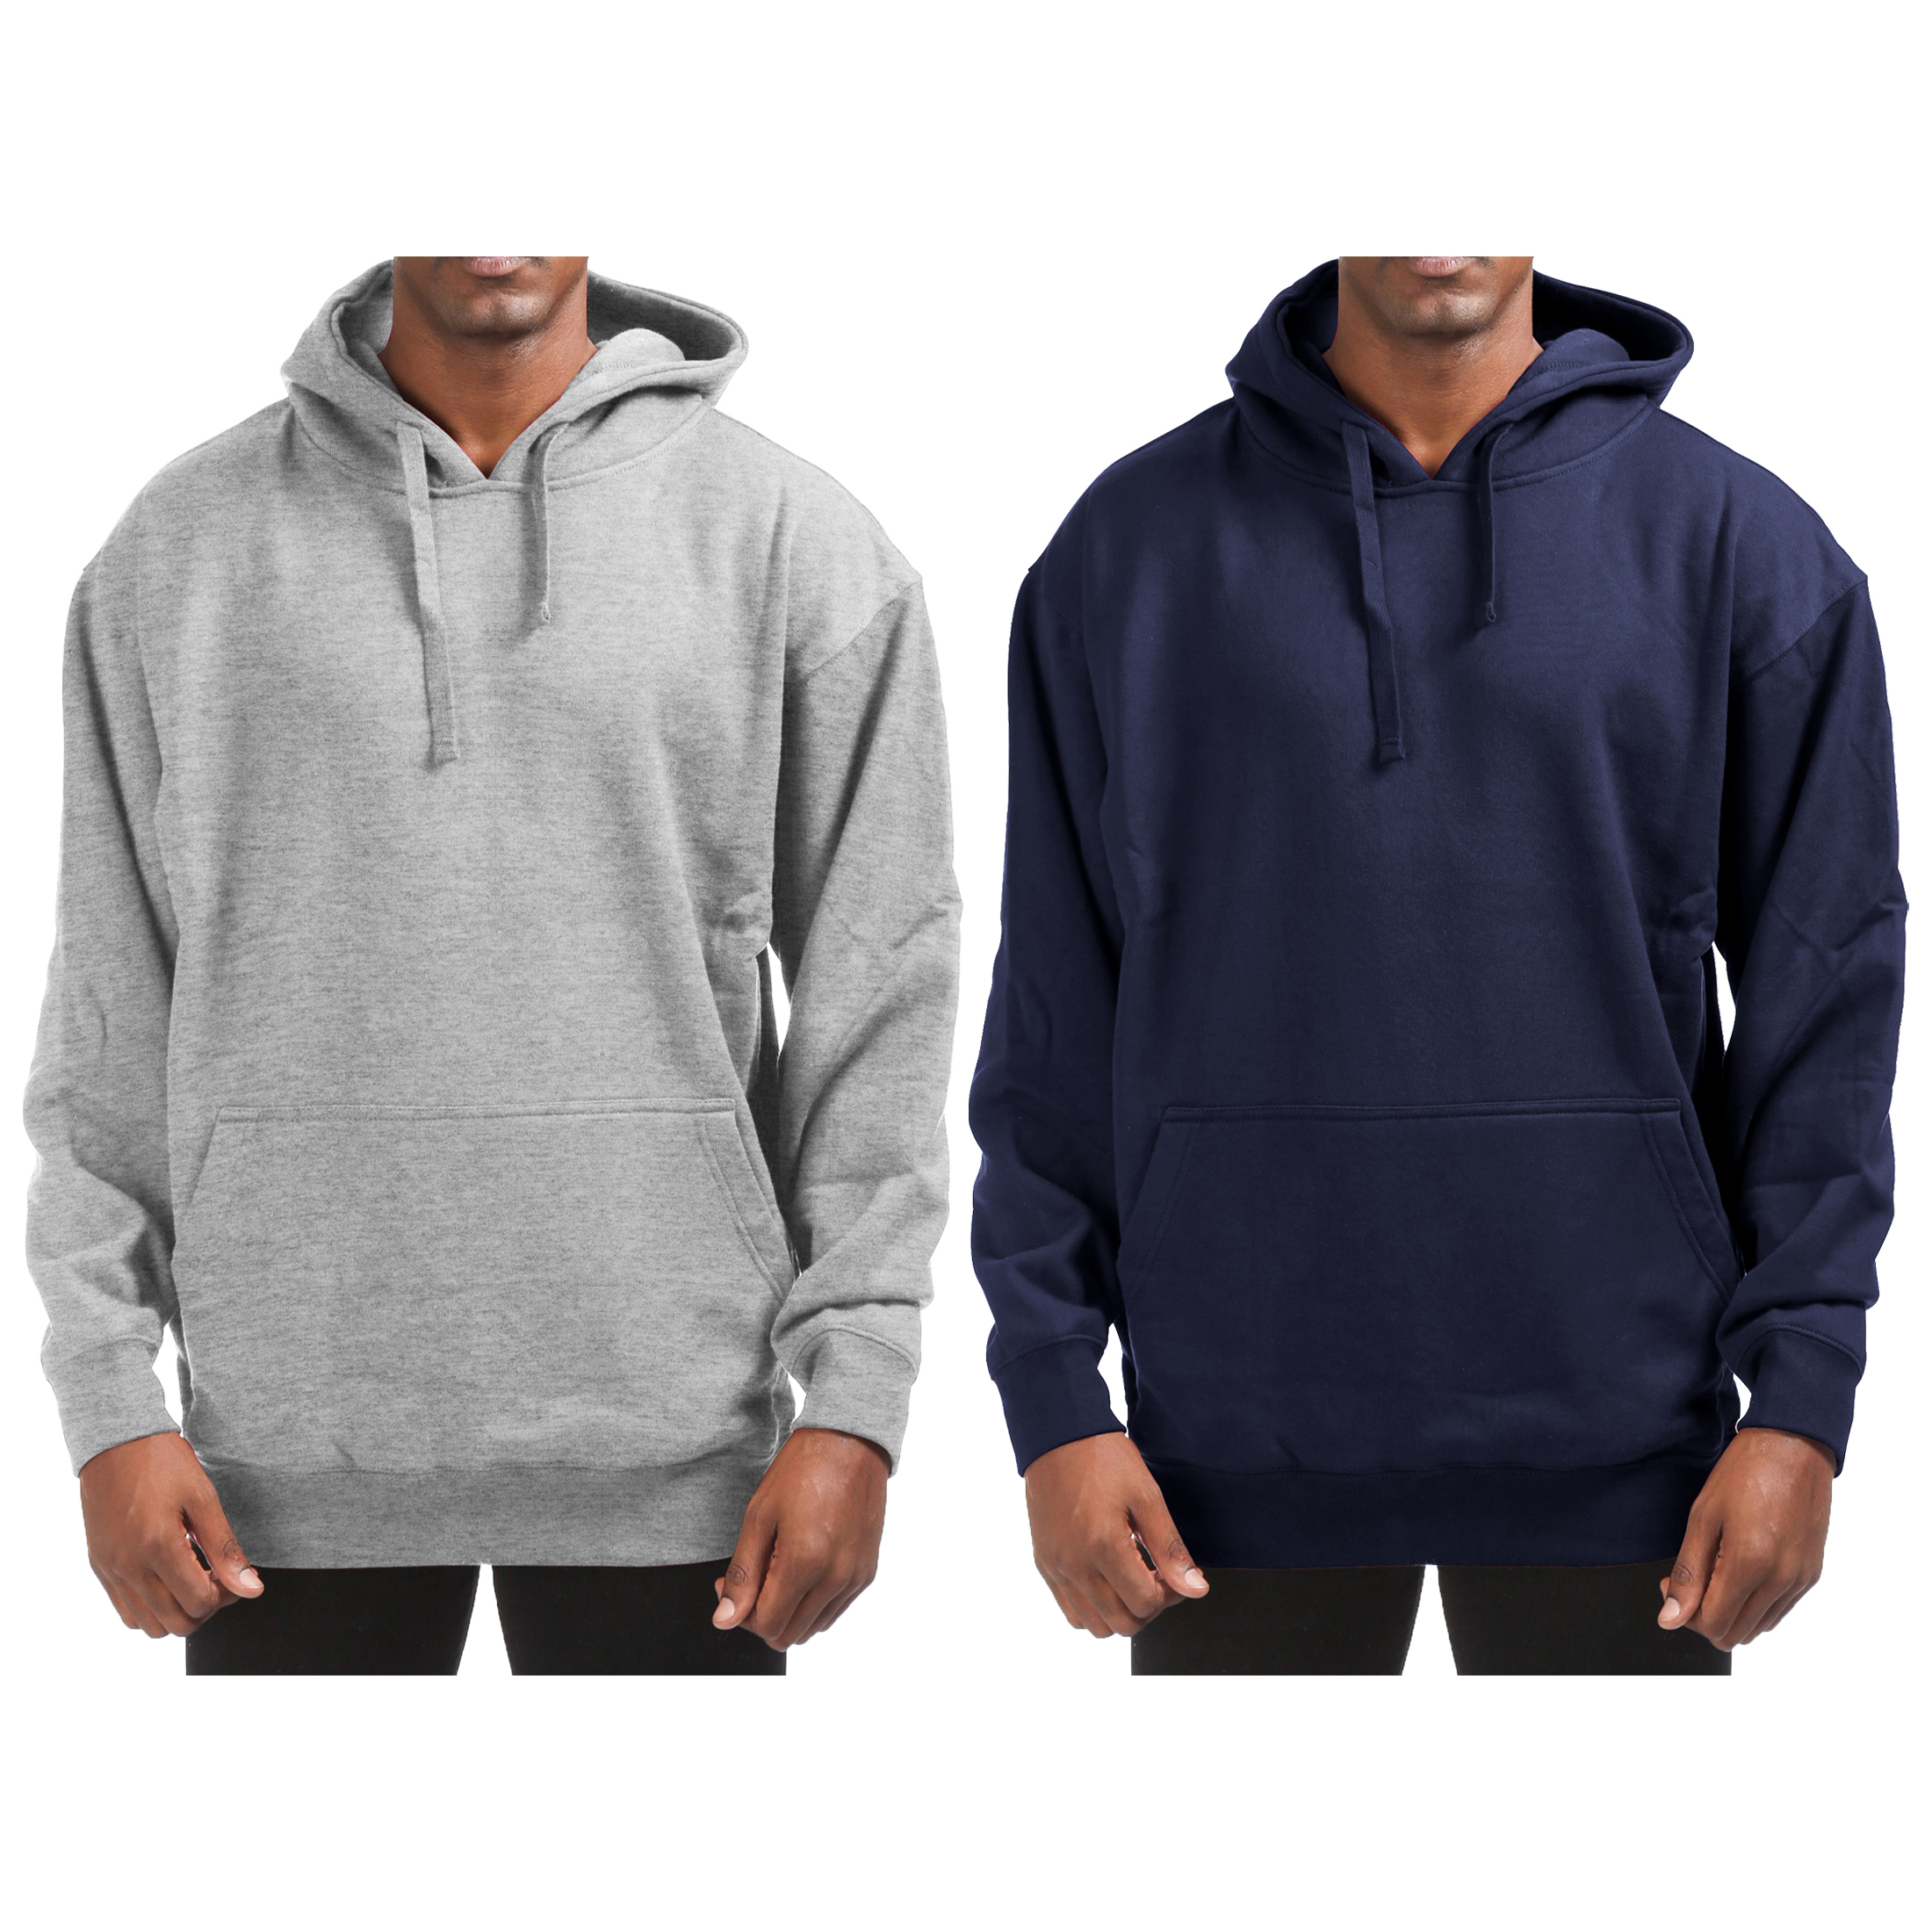 1-PACK Men's Cotton-Blend Fleece Pullover Hoodie With Pocket - 3XL